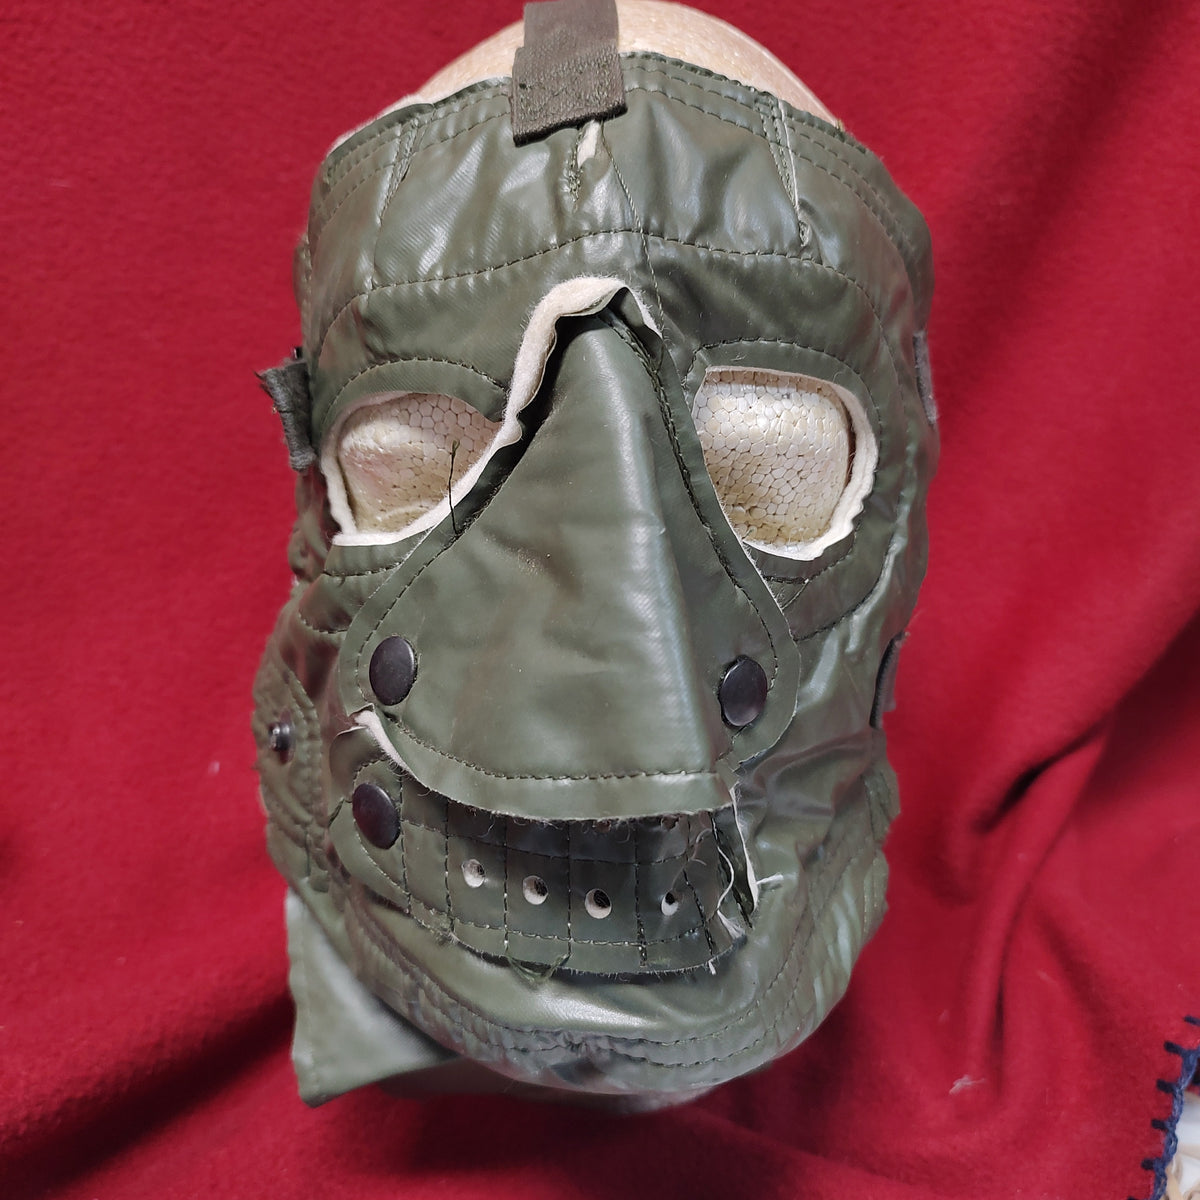 US GI Cold Weather Face Mask - The Riddler - Batman - Army